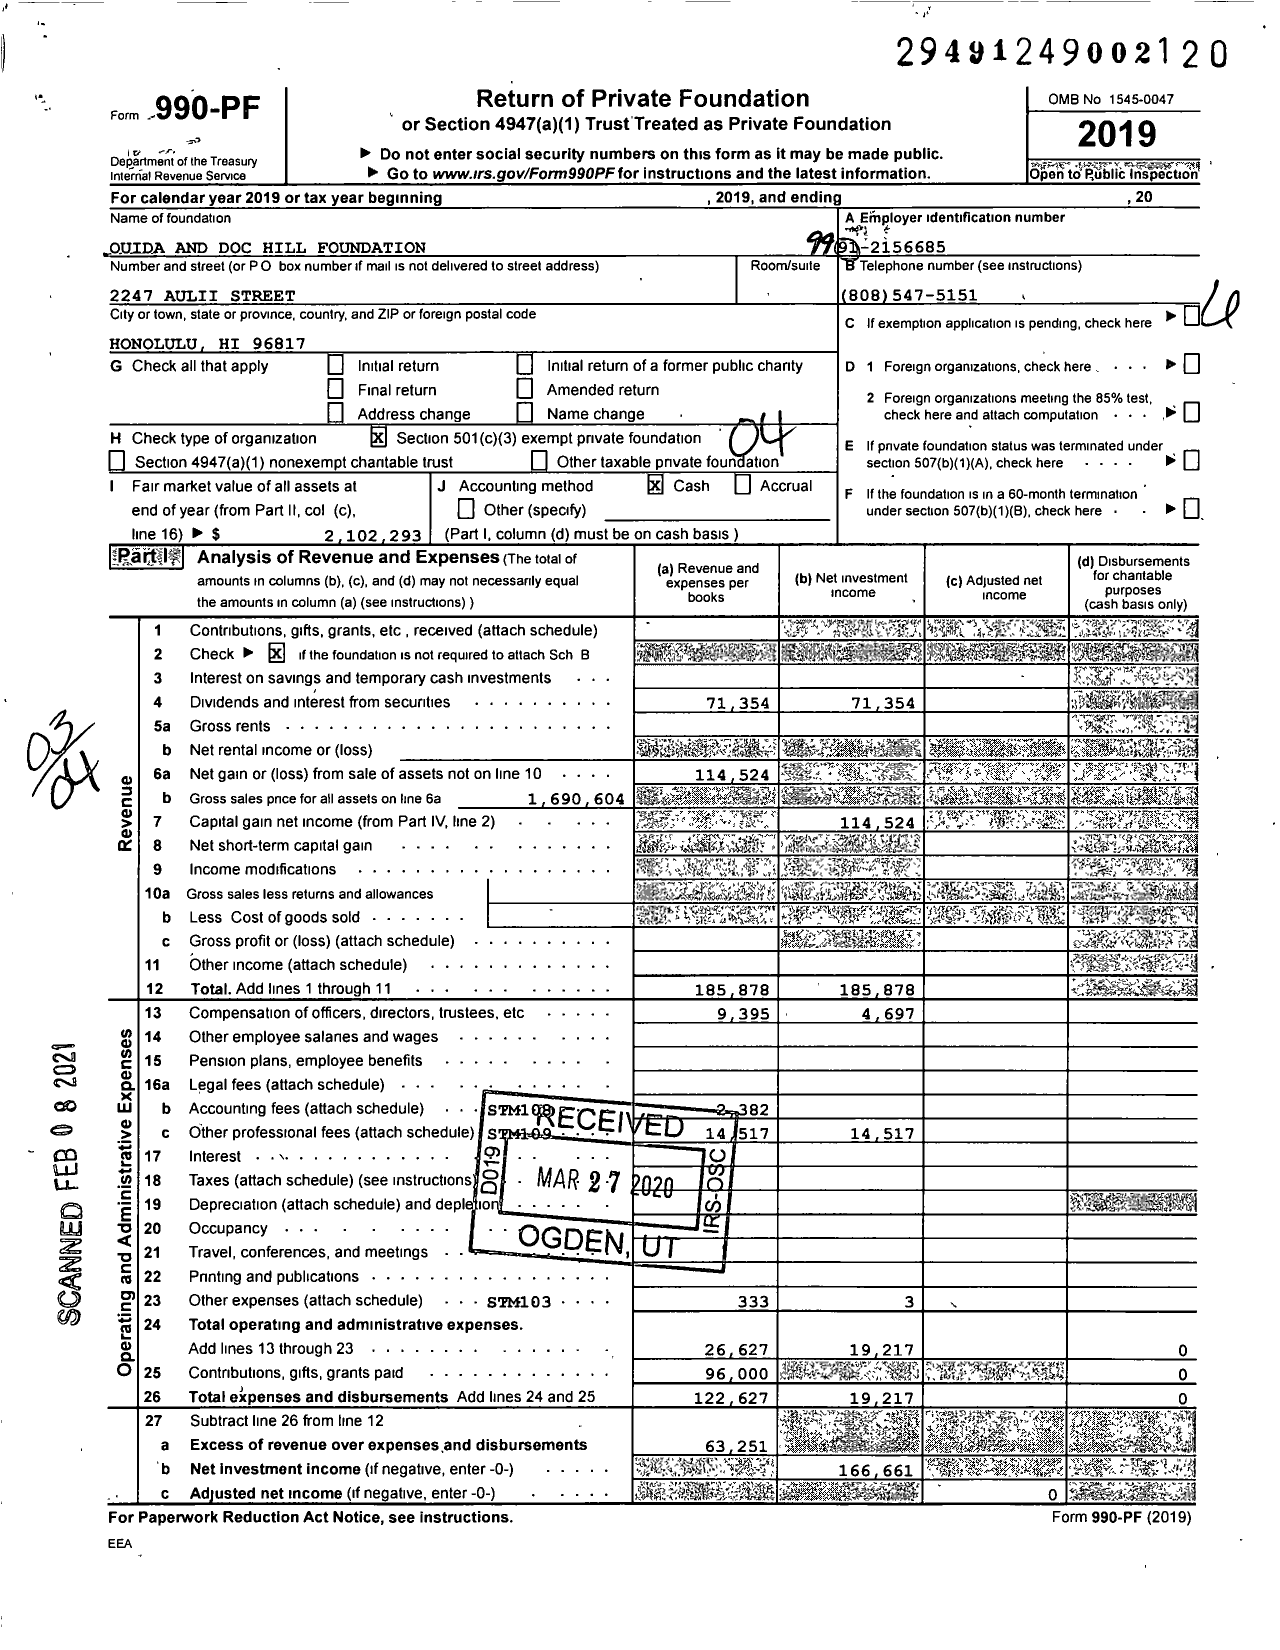 Image of first page of 2019 Form 990PF for Ouida and Doc Hill Foundation